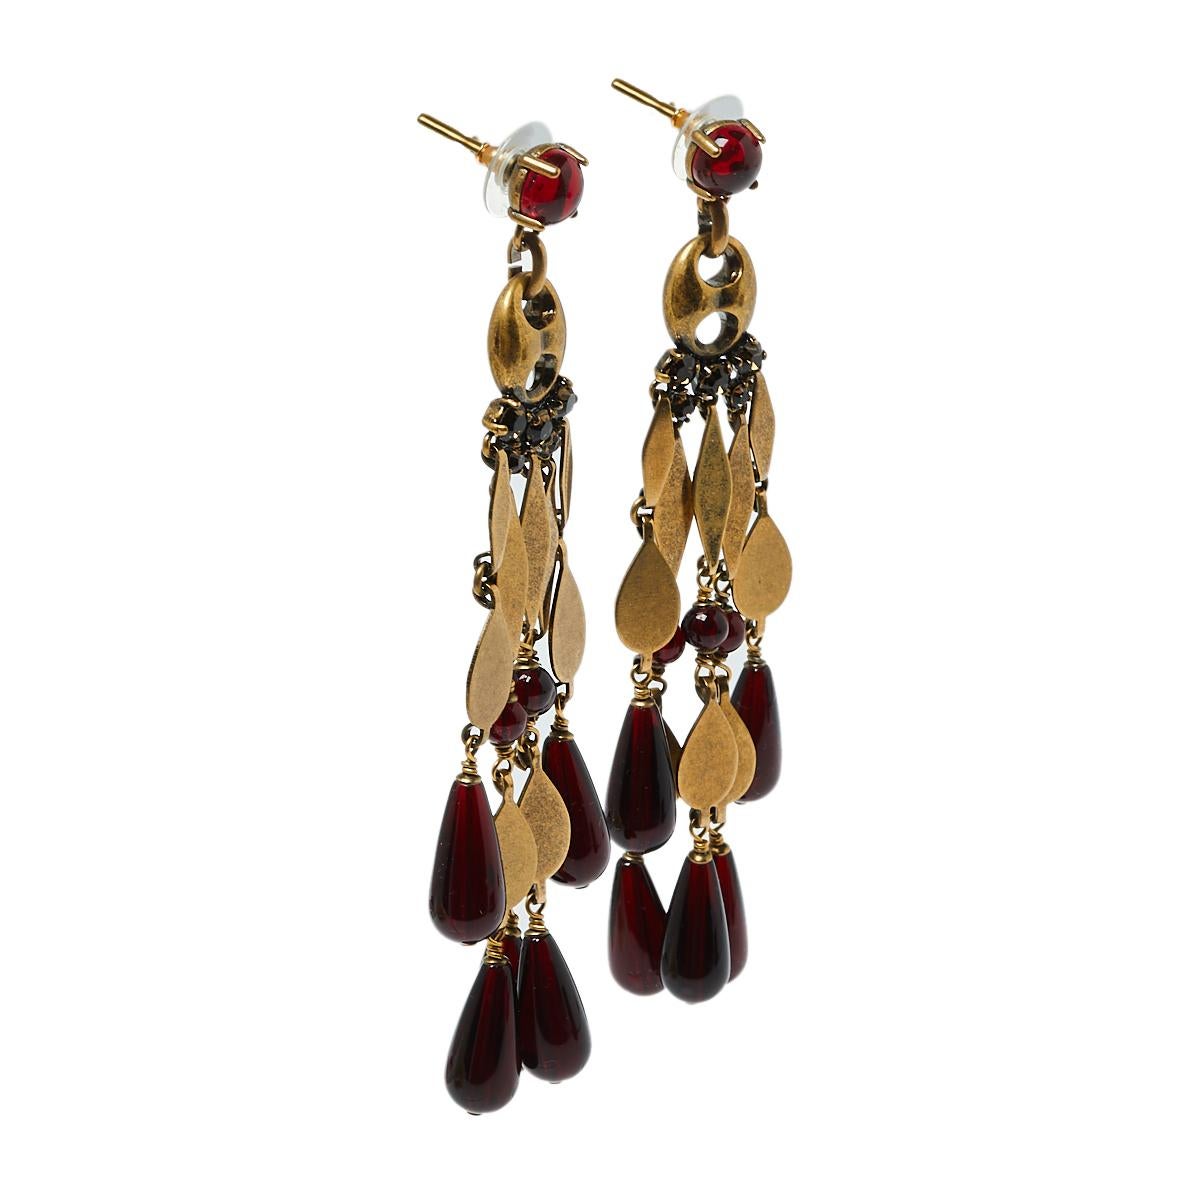 These Gucci earrings feature crystals, beads, and aged gold-tone metal to project a mesmerizing end result. Designed in a chandelier style, they are elegant and comfortable. The perfect gift for a jewelry lover or the perfect addition to your